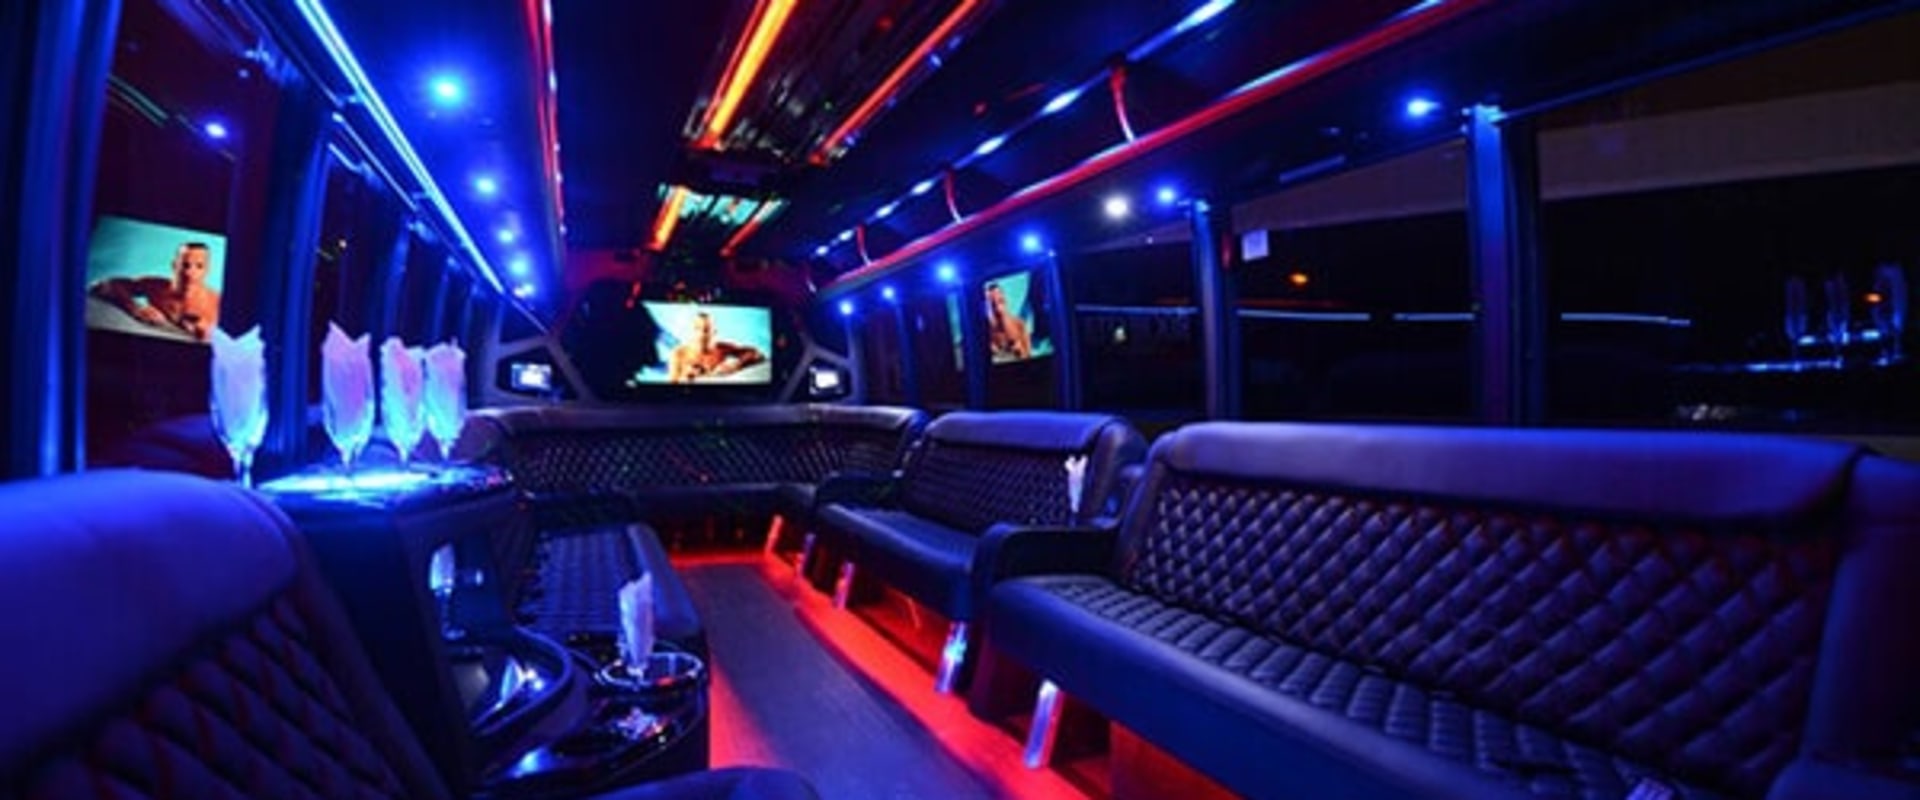 What Are the Fees for Renting a Party Bus?